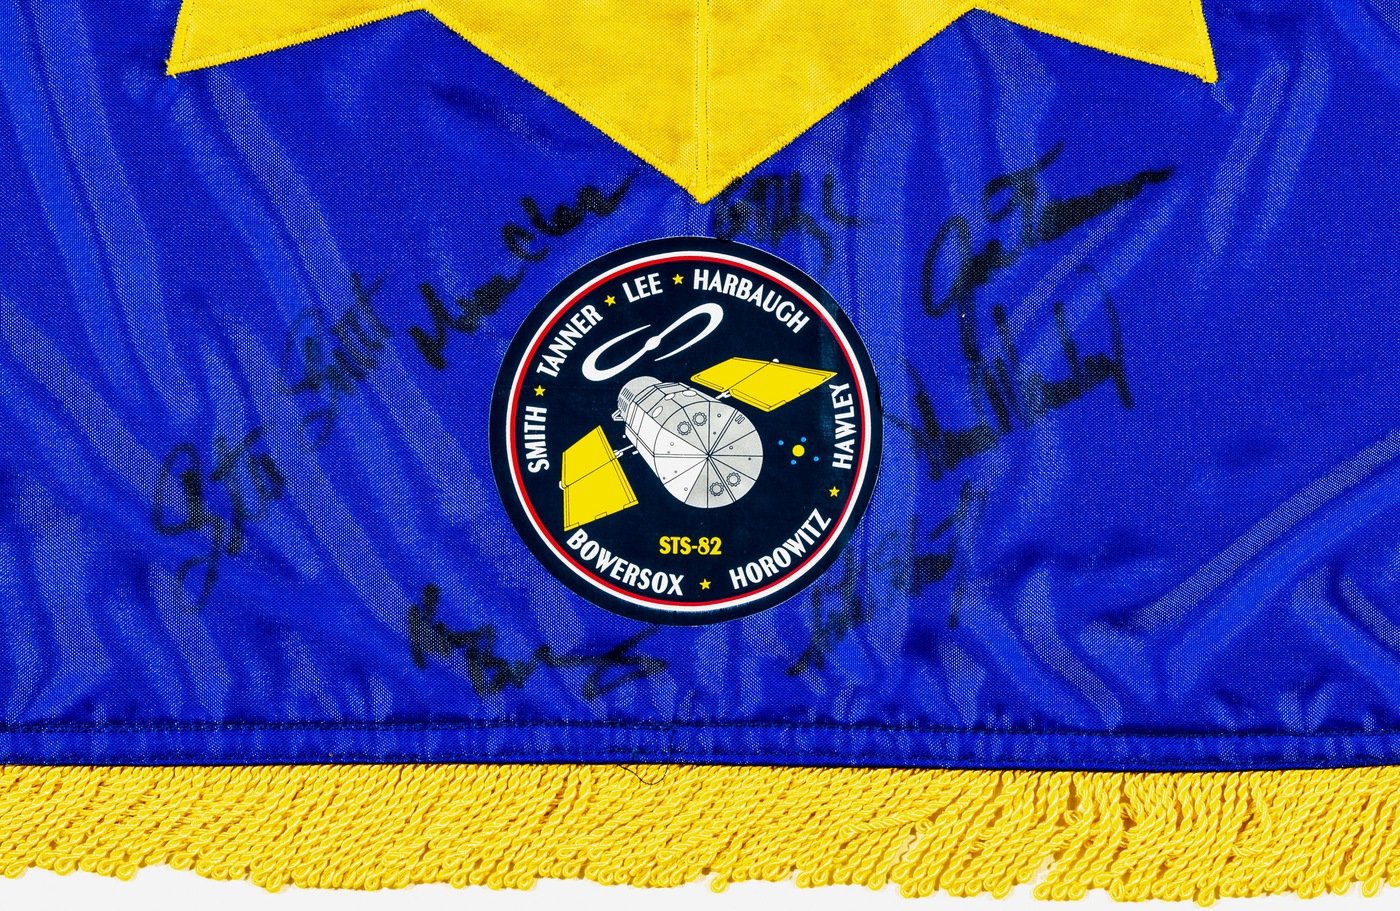 A seal from the space flight is attached to the FBI flag with autographs from each astronaut. Steve’s signature is on the far left. Every space flight has its own uniquely designed seal.